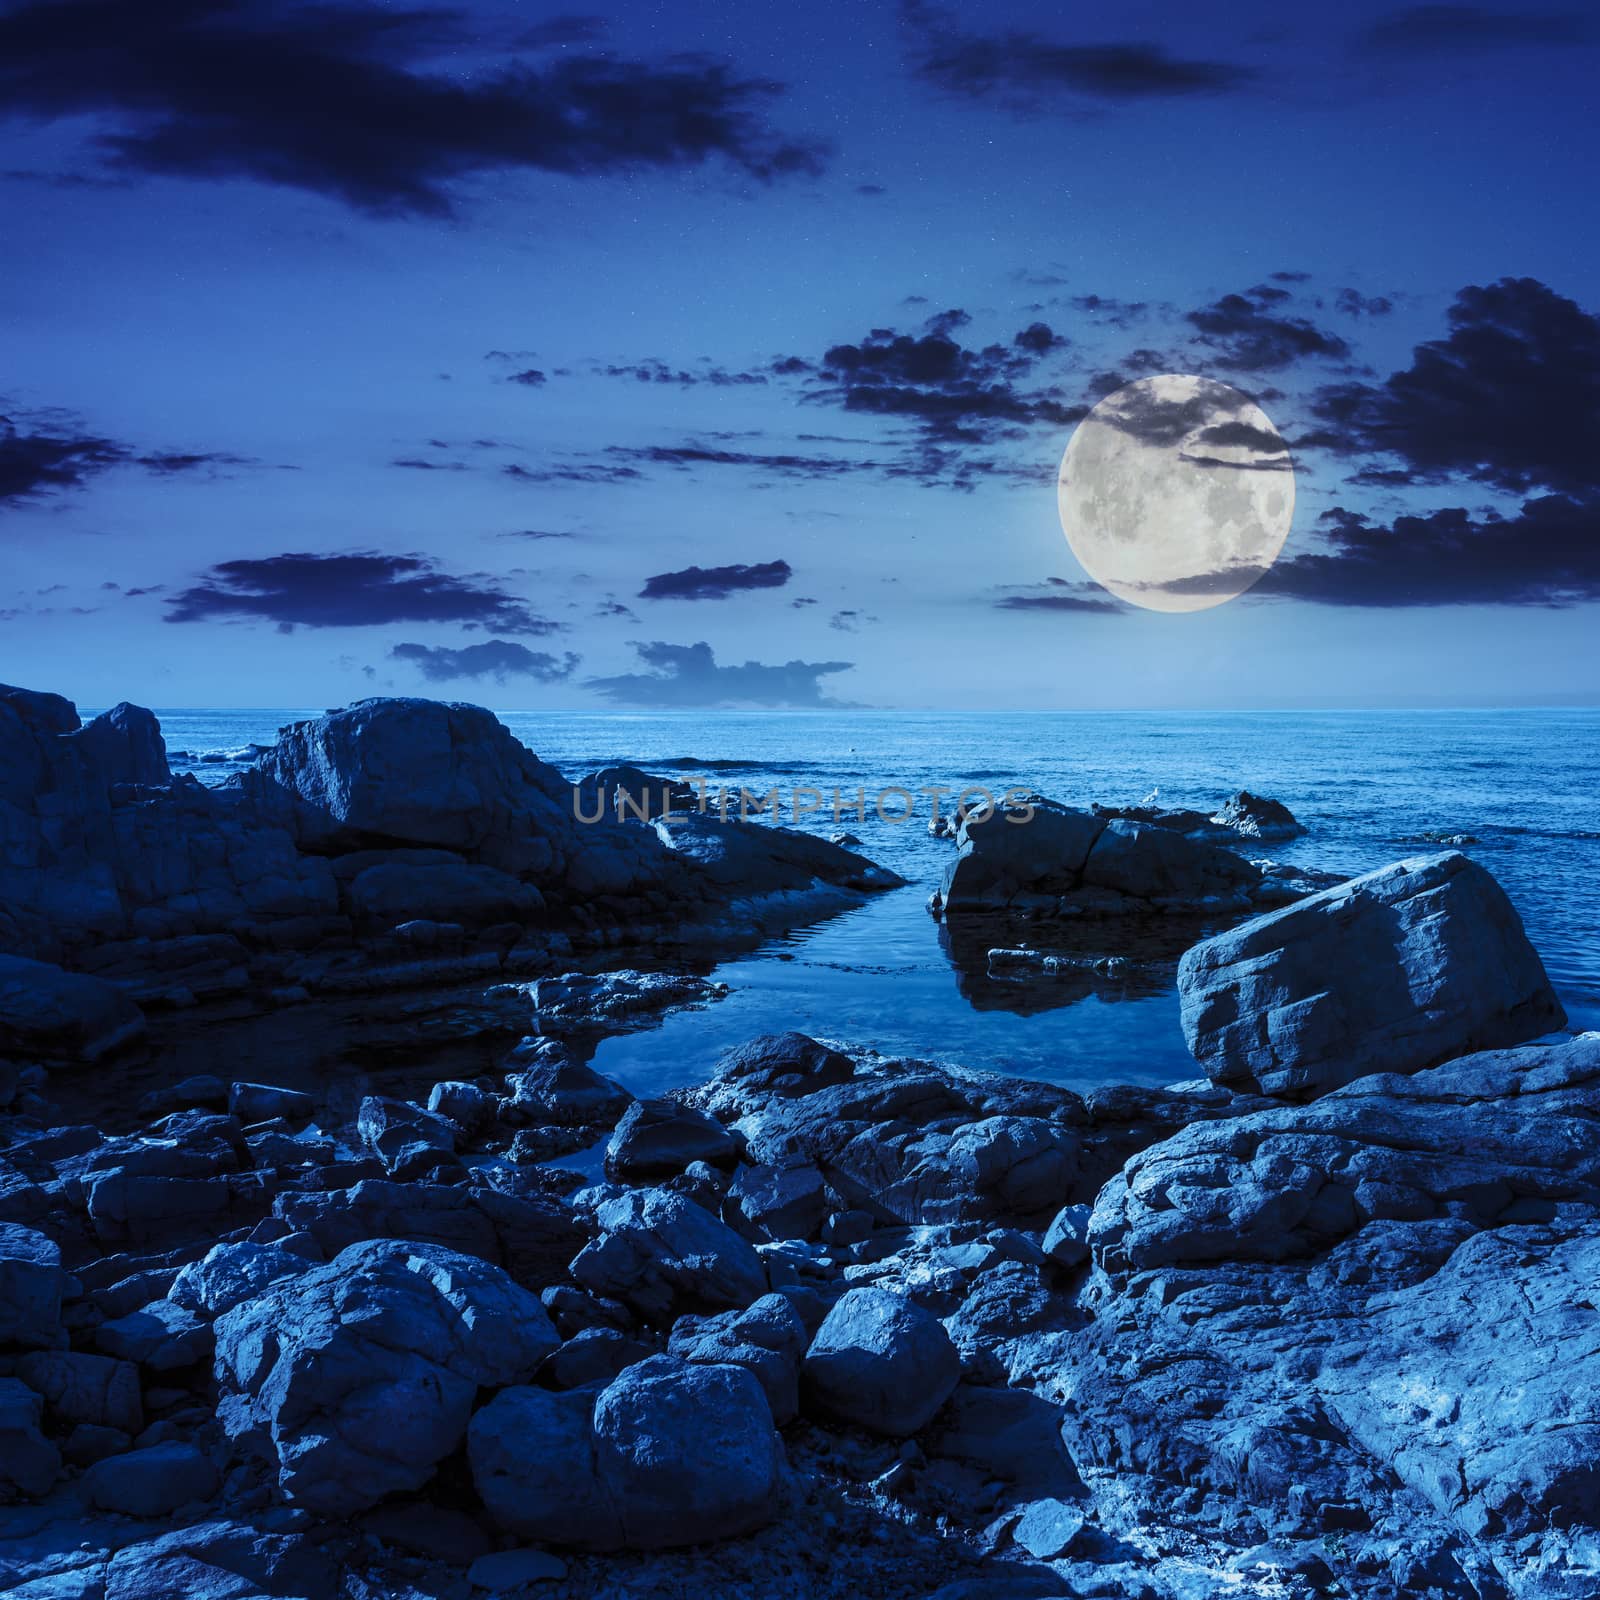 calm sea wave on rocky shore with boulders at night in moon light